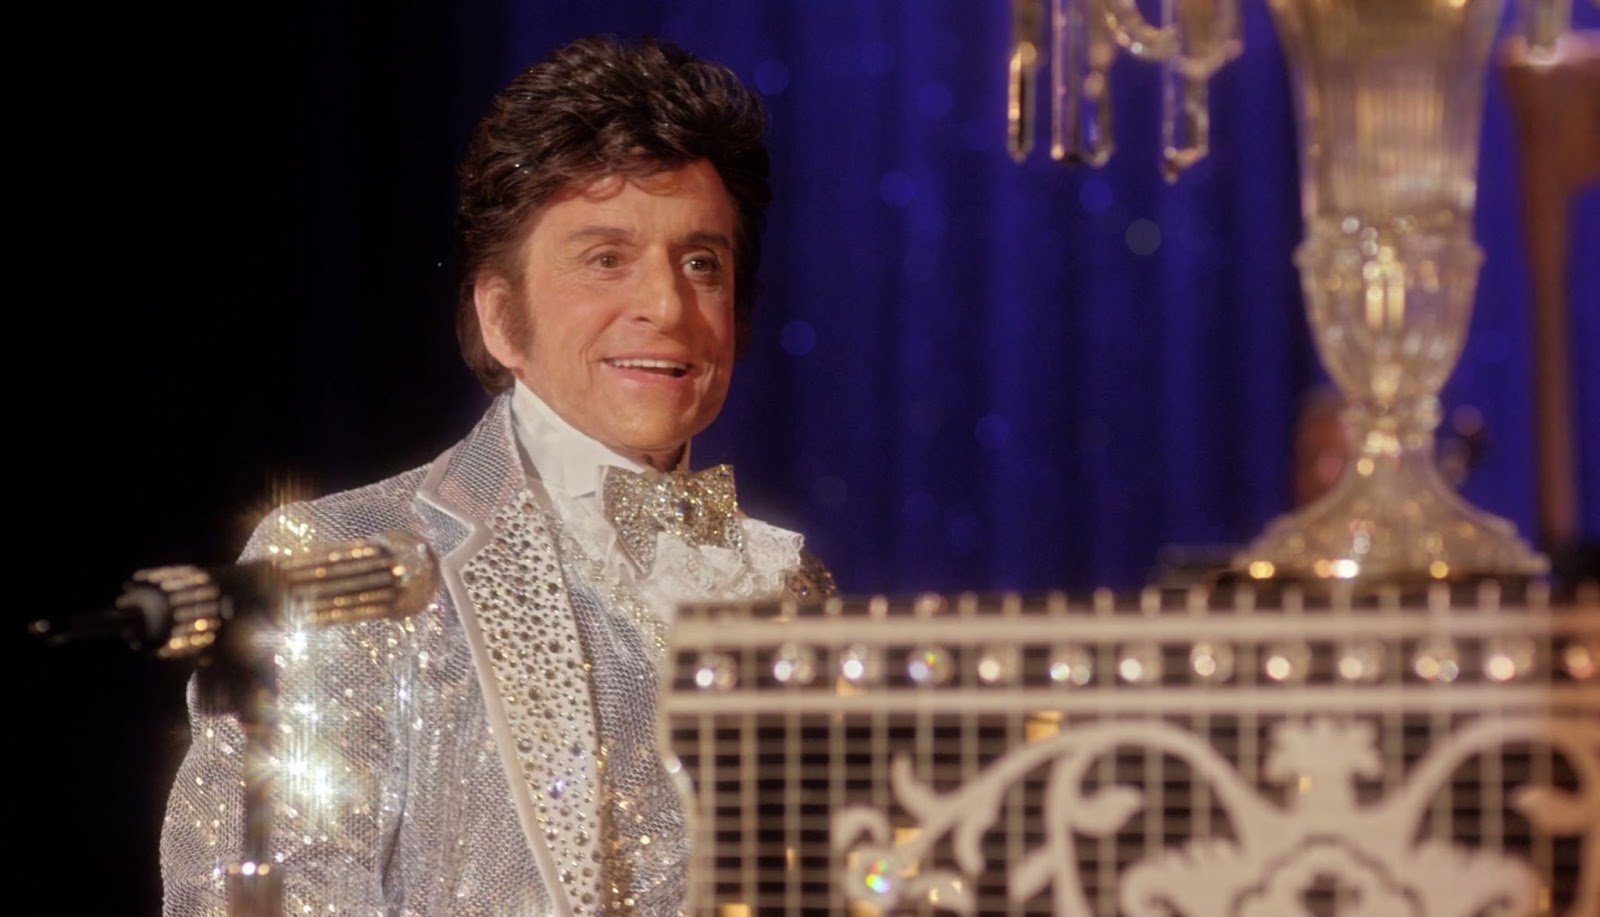 Behind the Candelabra starring Michael Douglas as Liberace